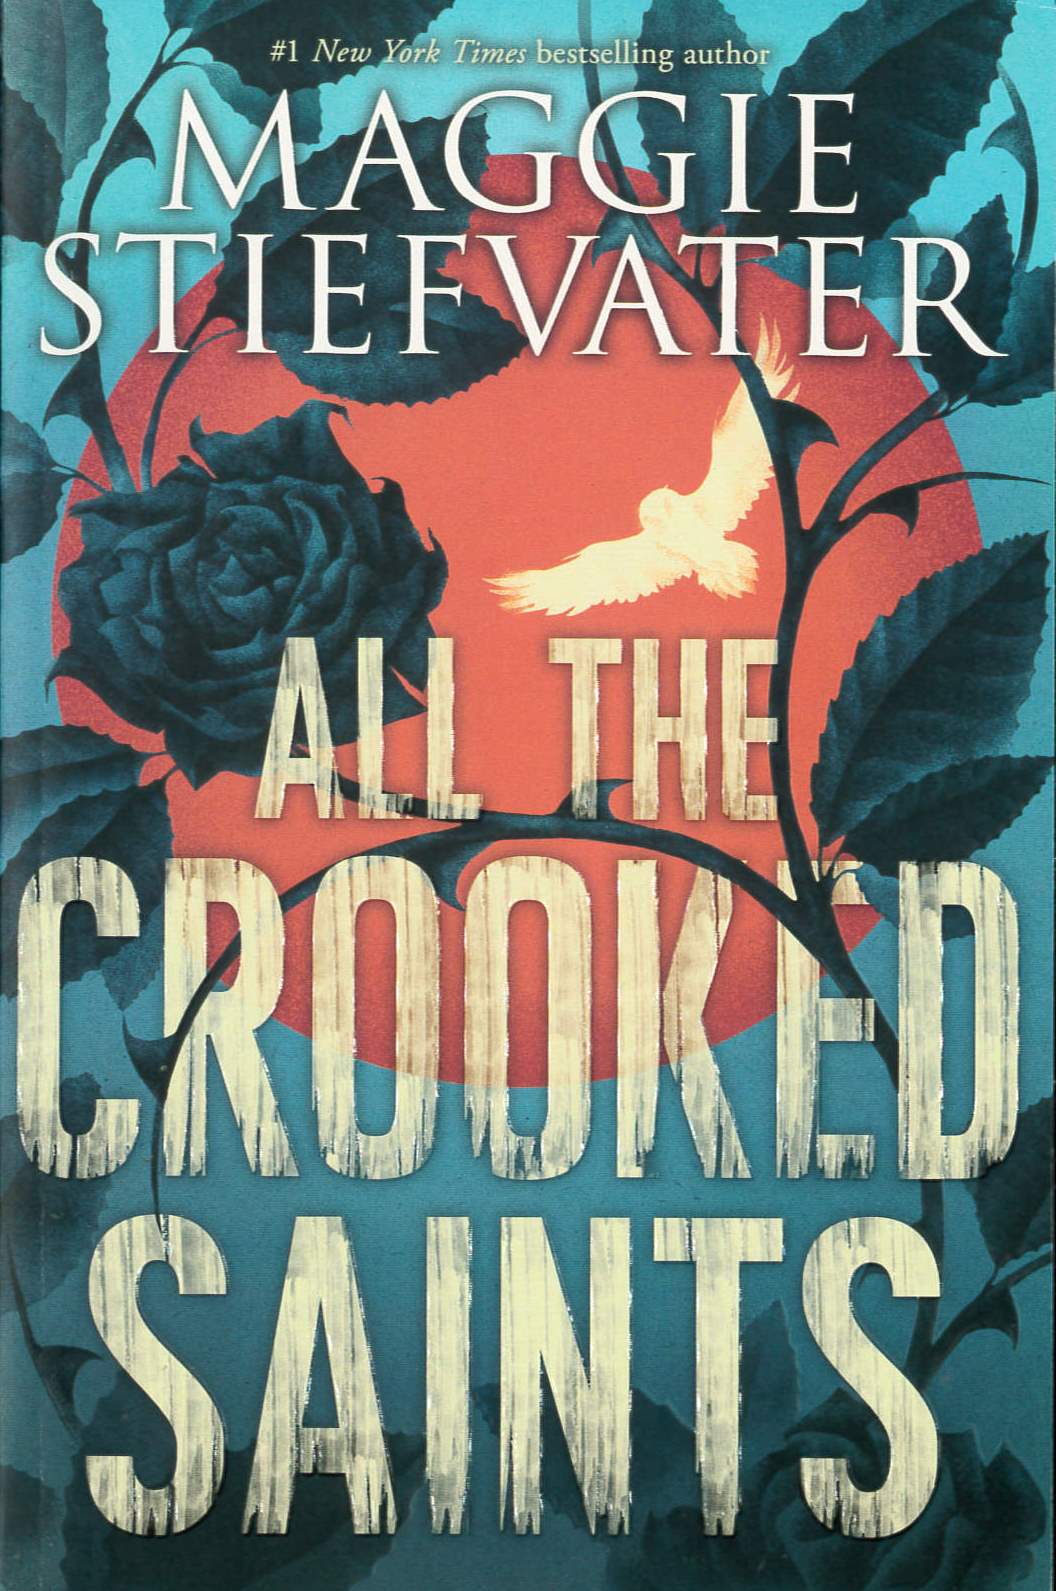 All the crooked saints /